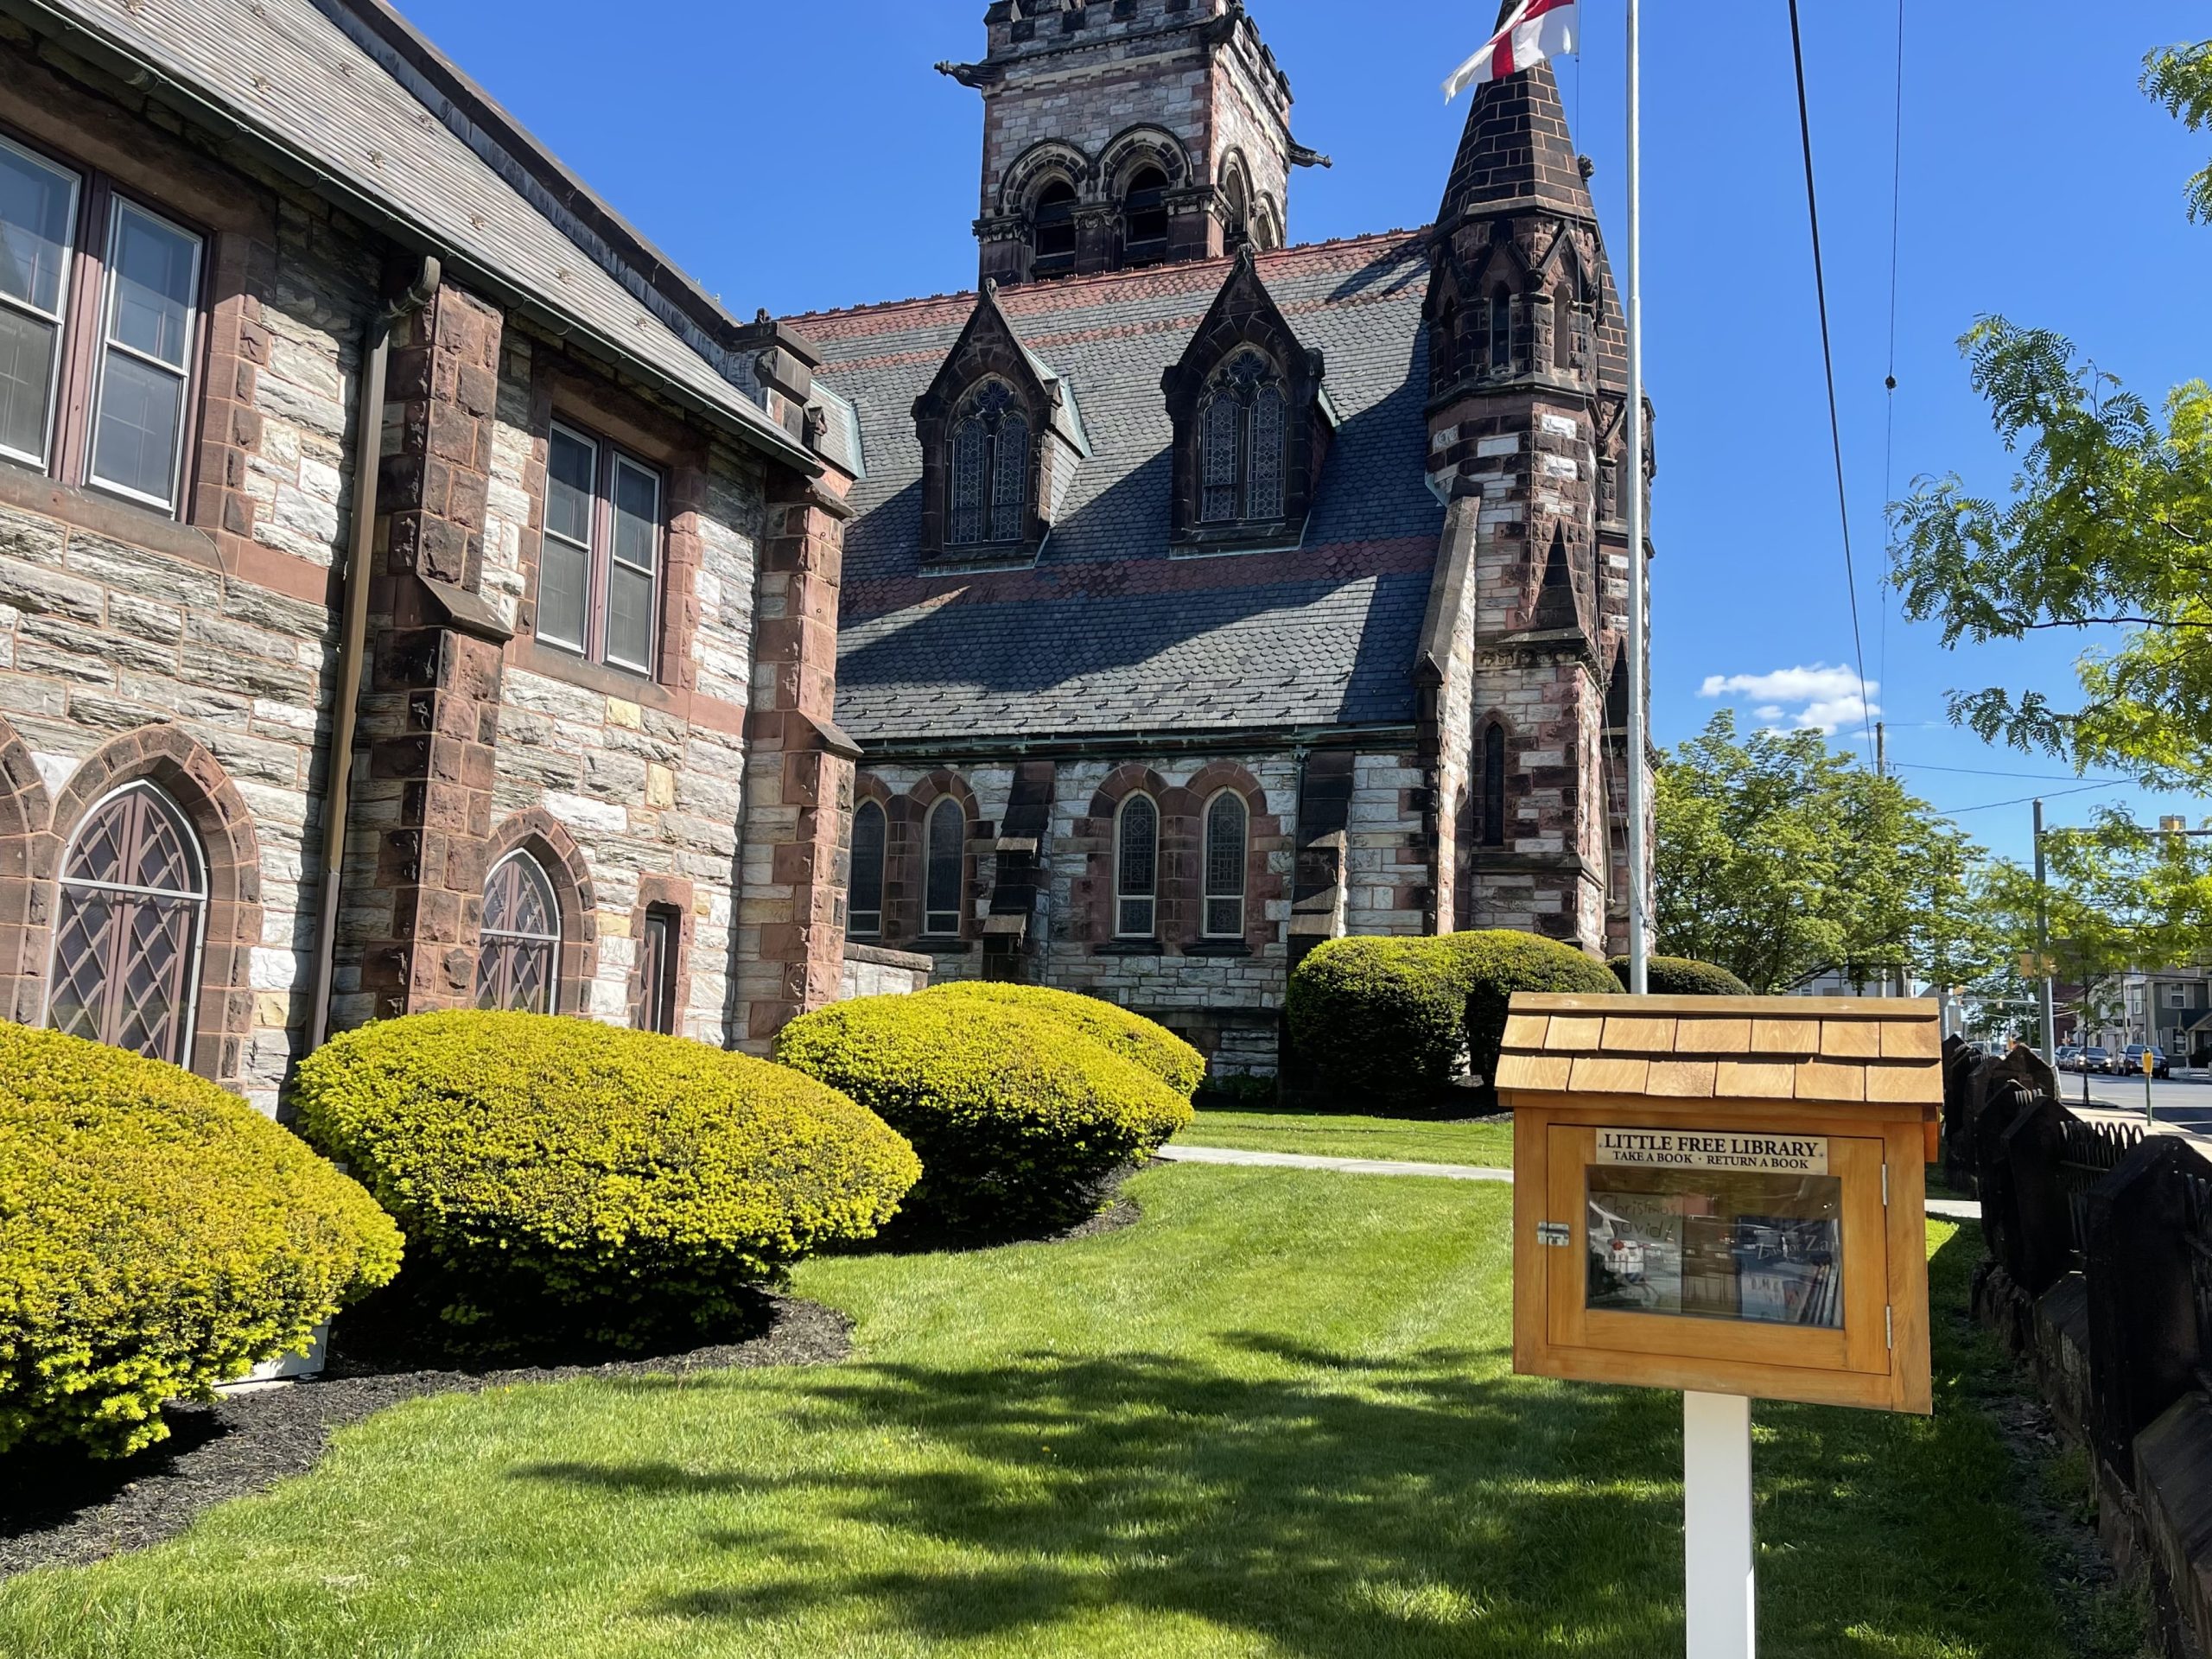 exterior church and little free library